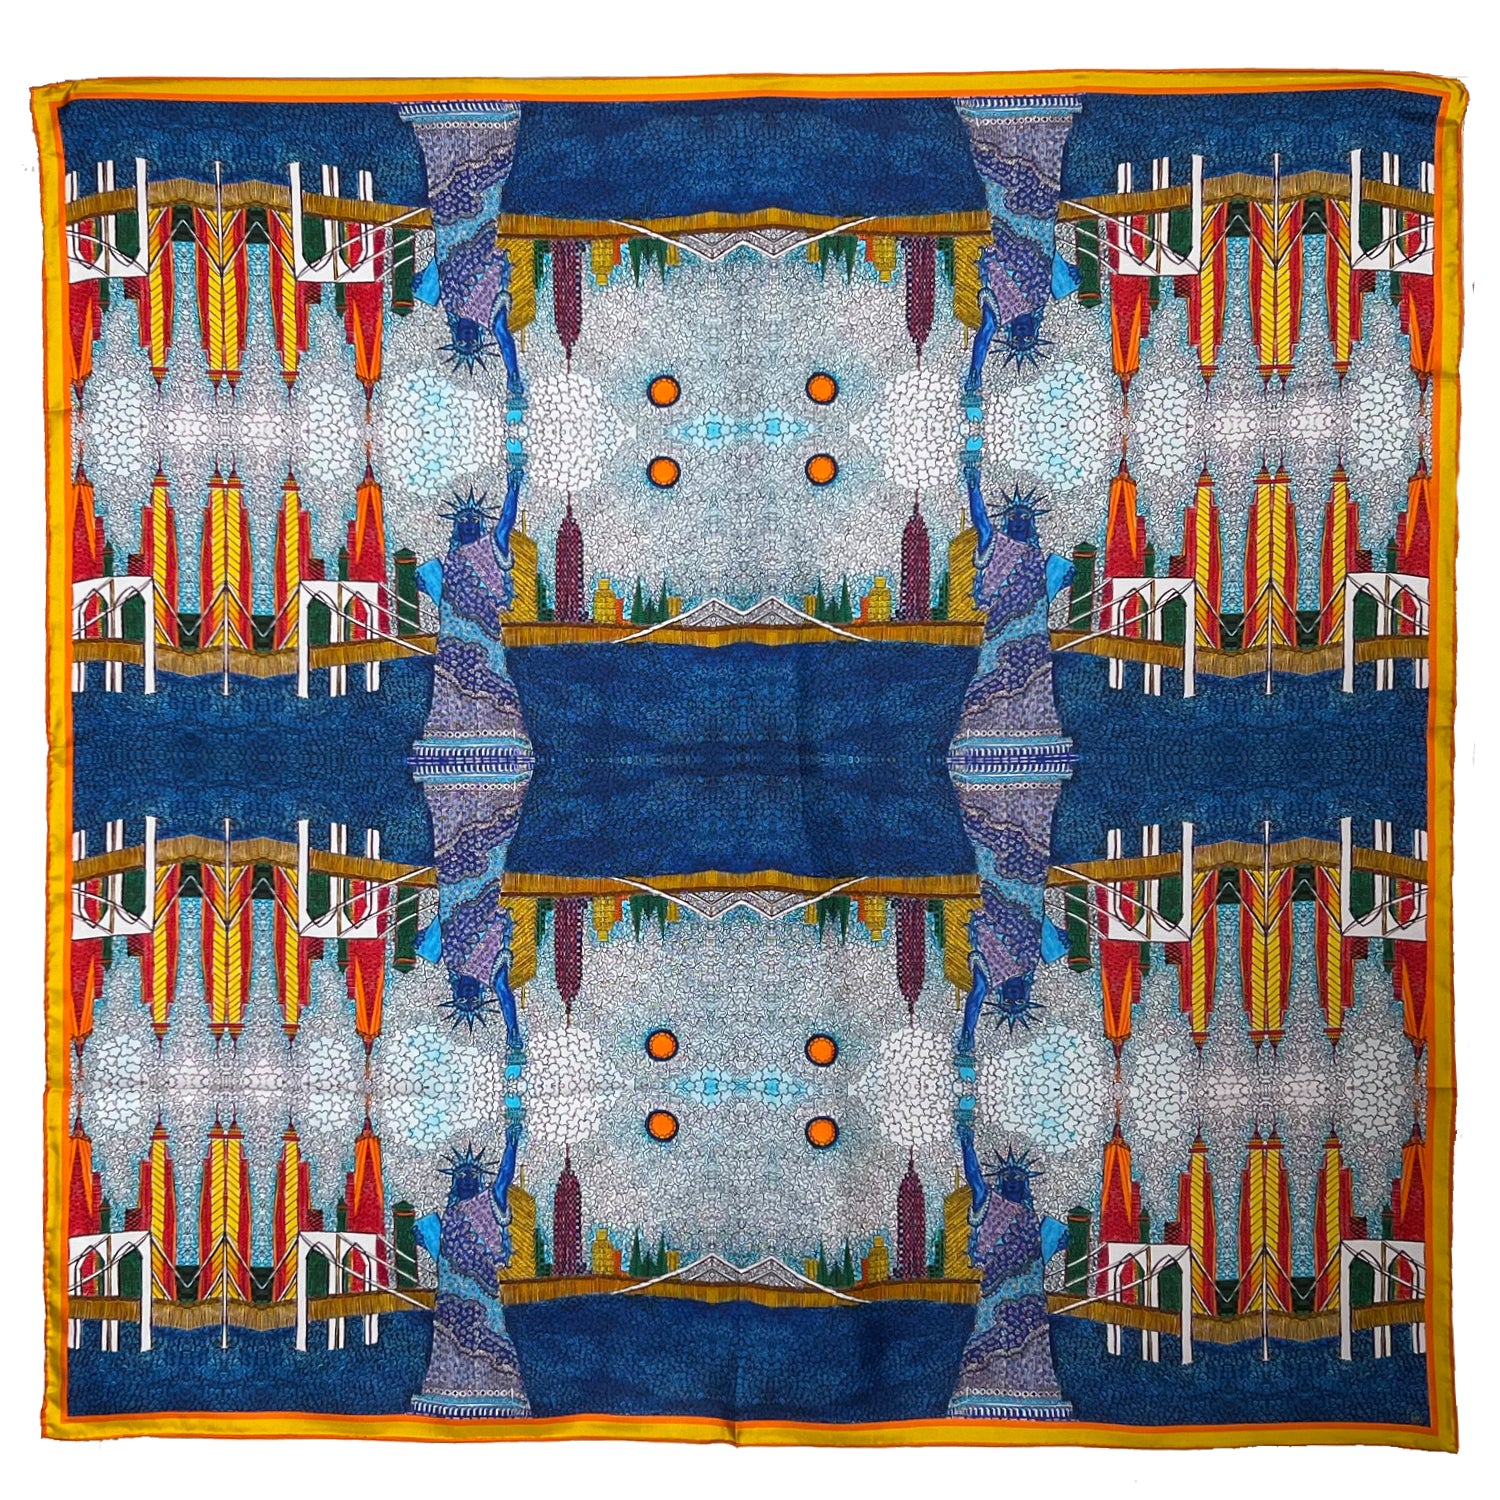 The square New York scarf with skyline in bright colors, painted by hand and printed on silk